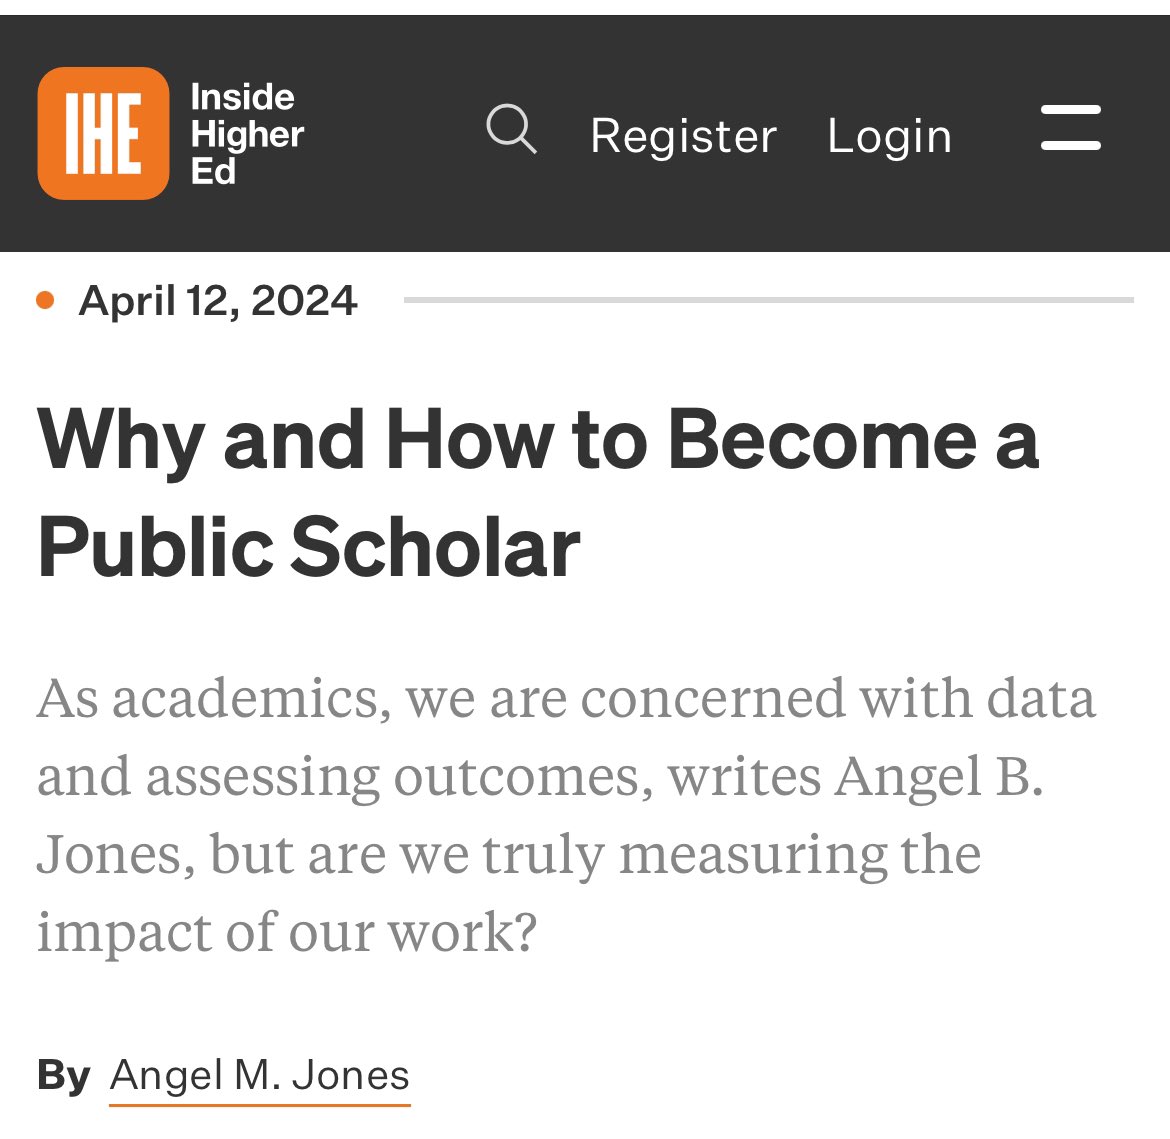 Check out my latest article on @insidehighered about how and why to become a public scholar #StreetScholar insidehighered.com/opinion/career…